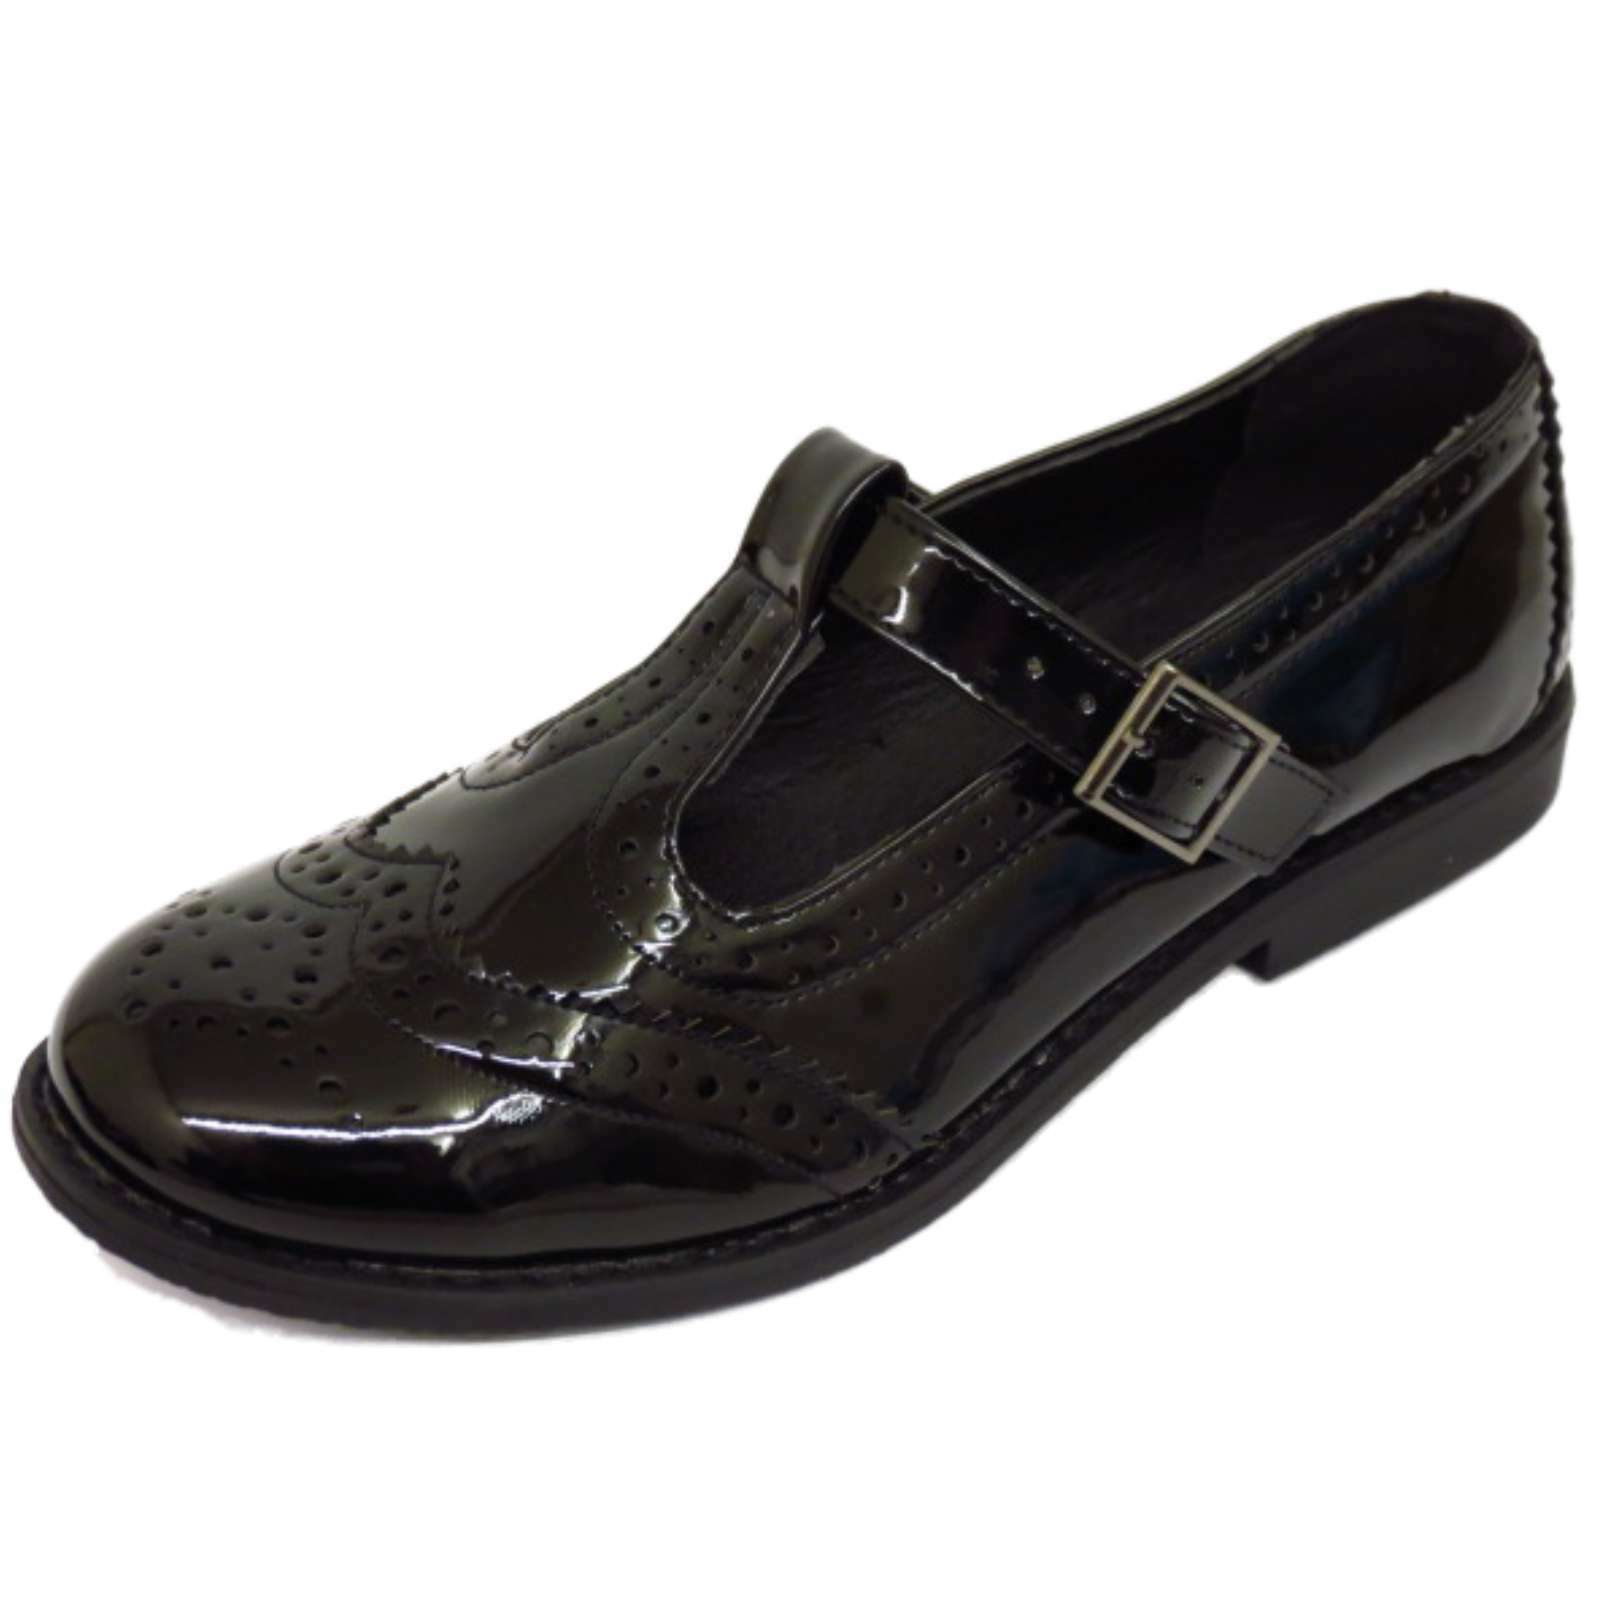 patent t bar shoes womens